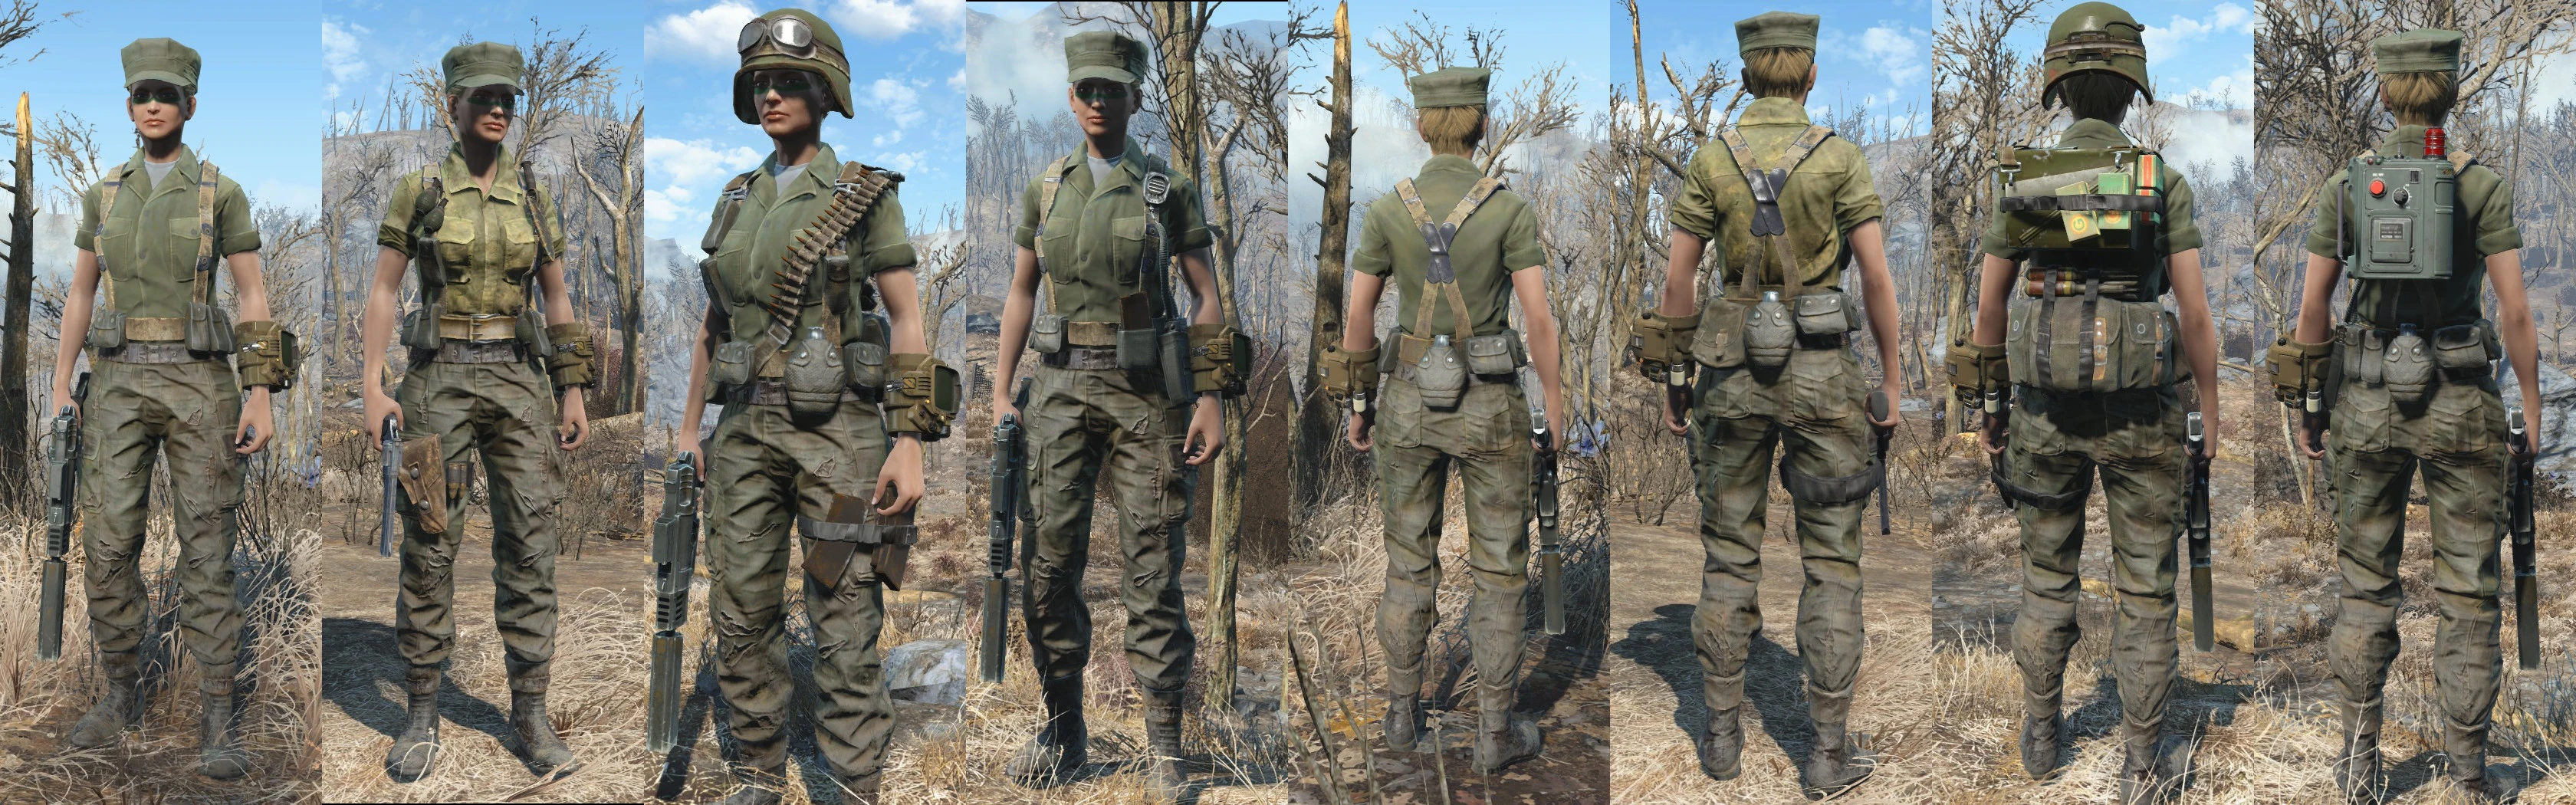 Fallout 4 army fatigues фото 3